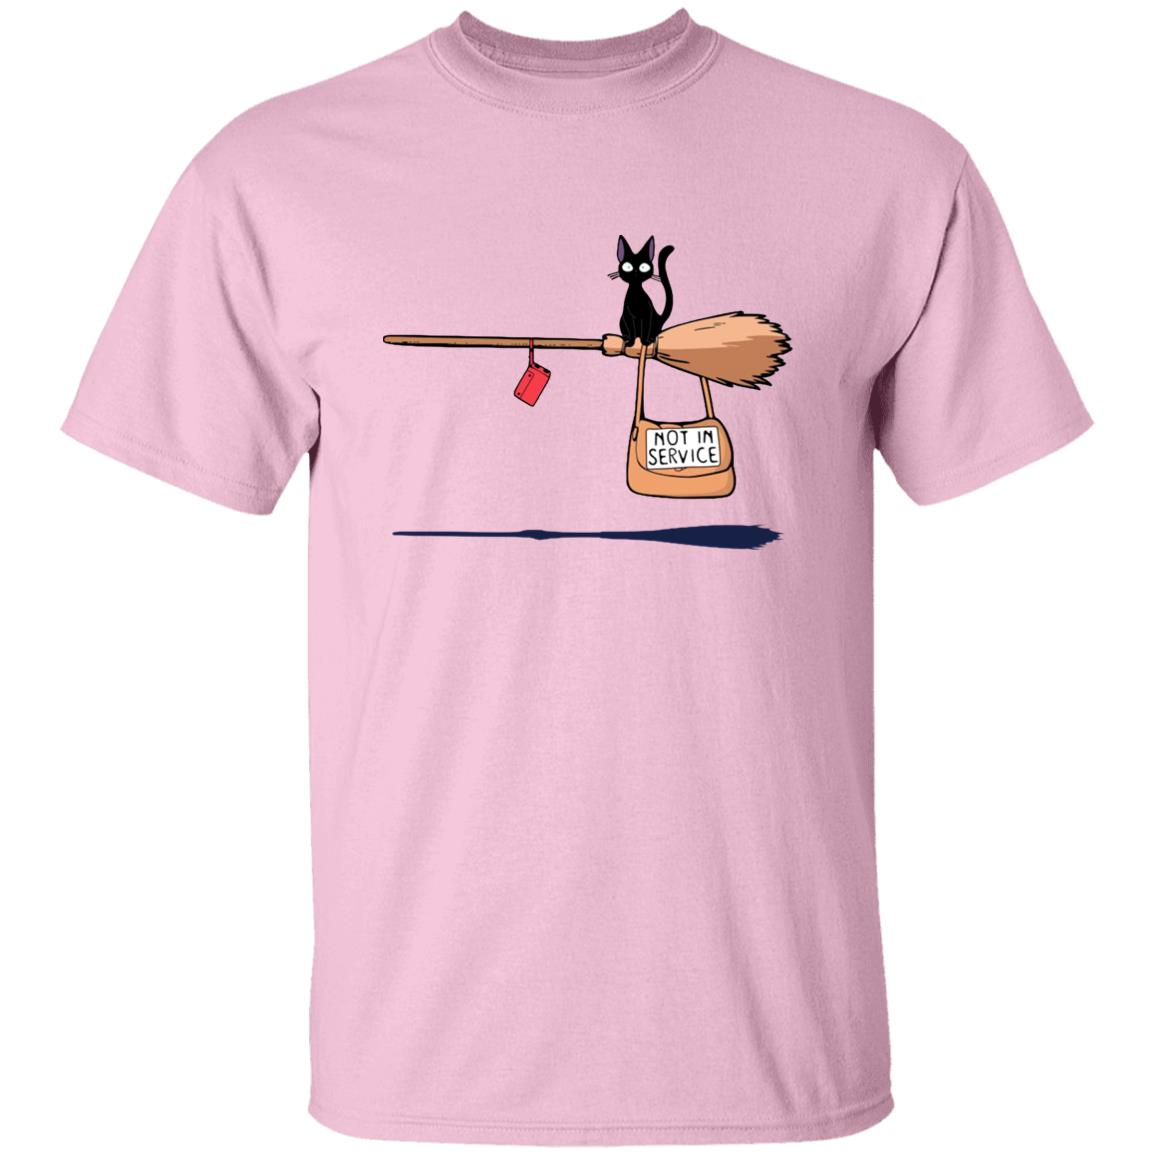 Kiki’s Delivery Service – Not in Service T Shirt